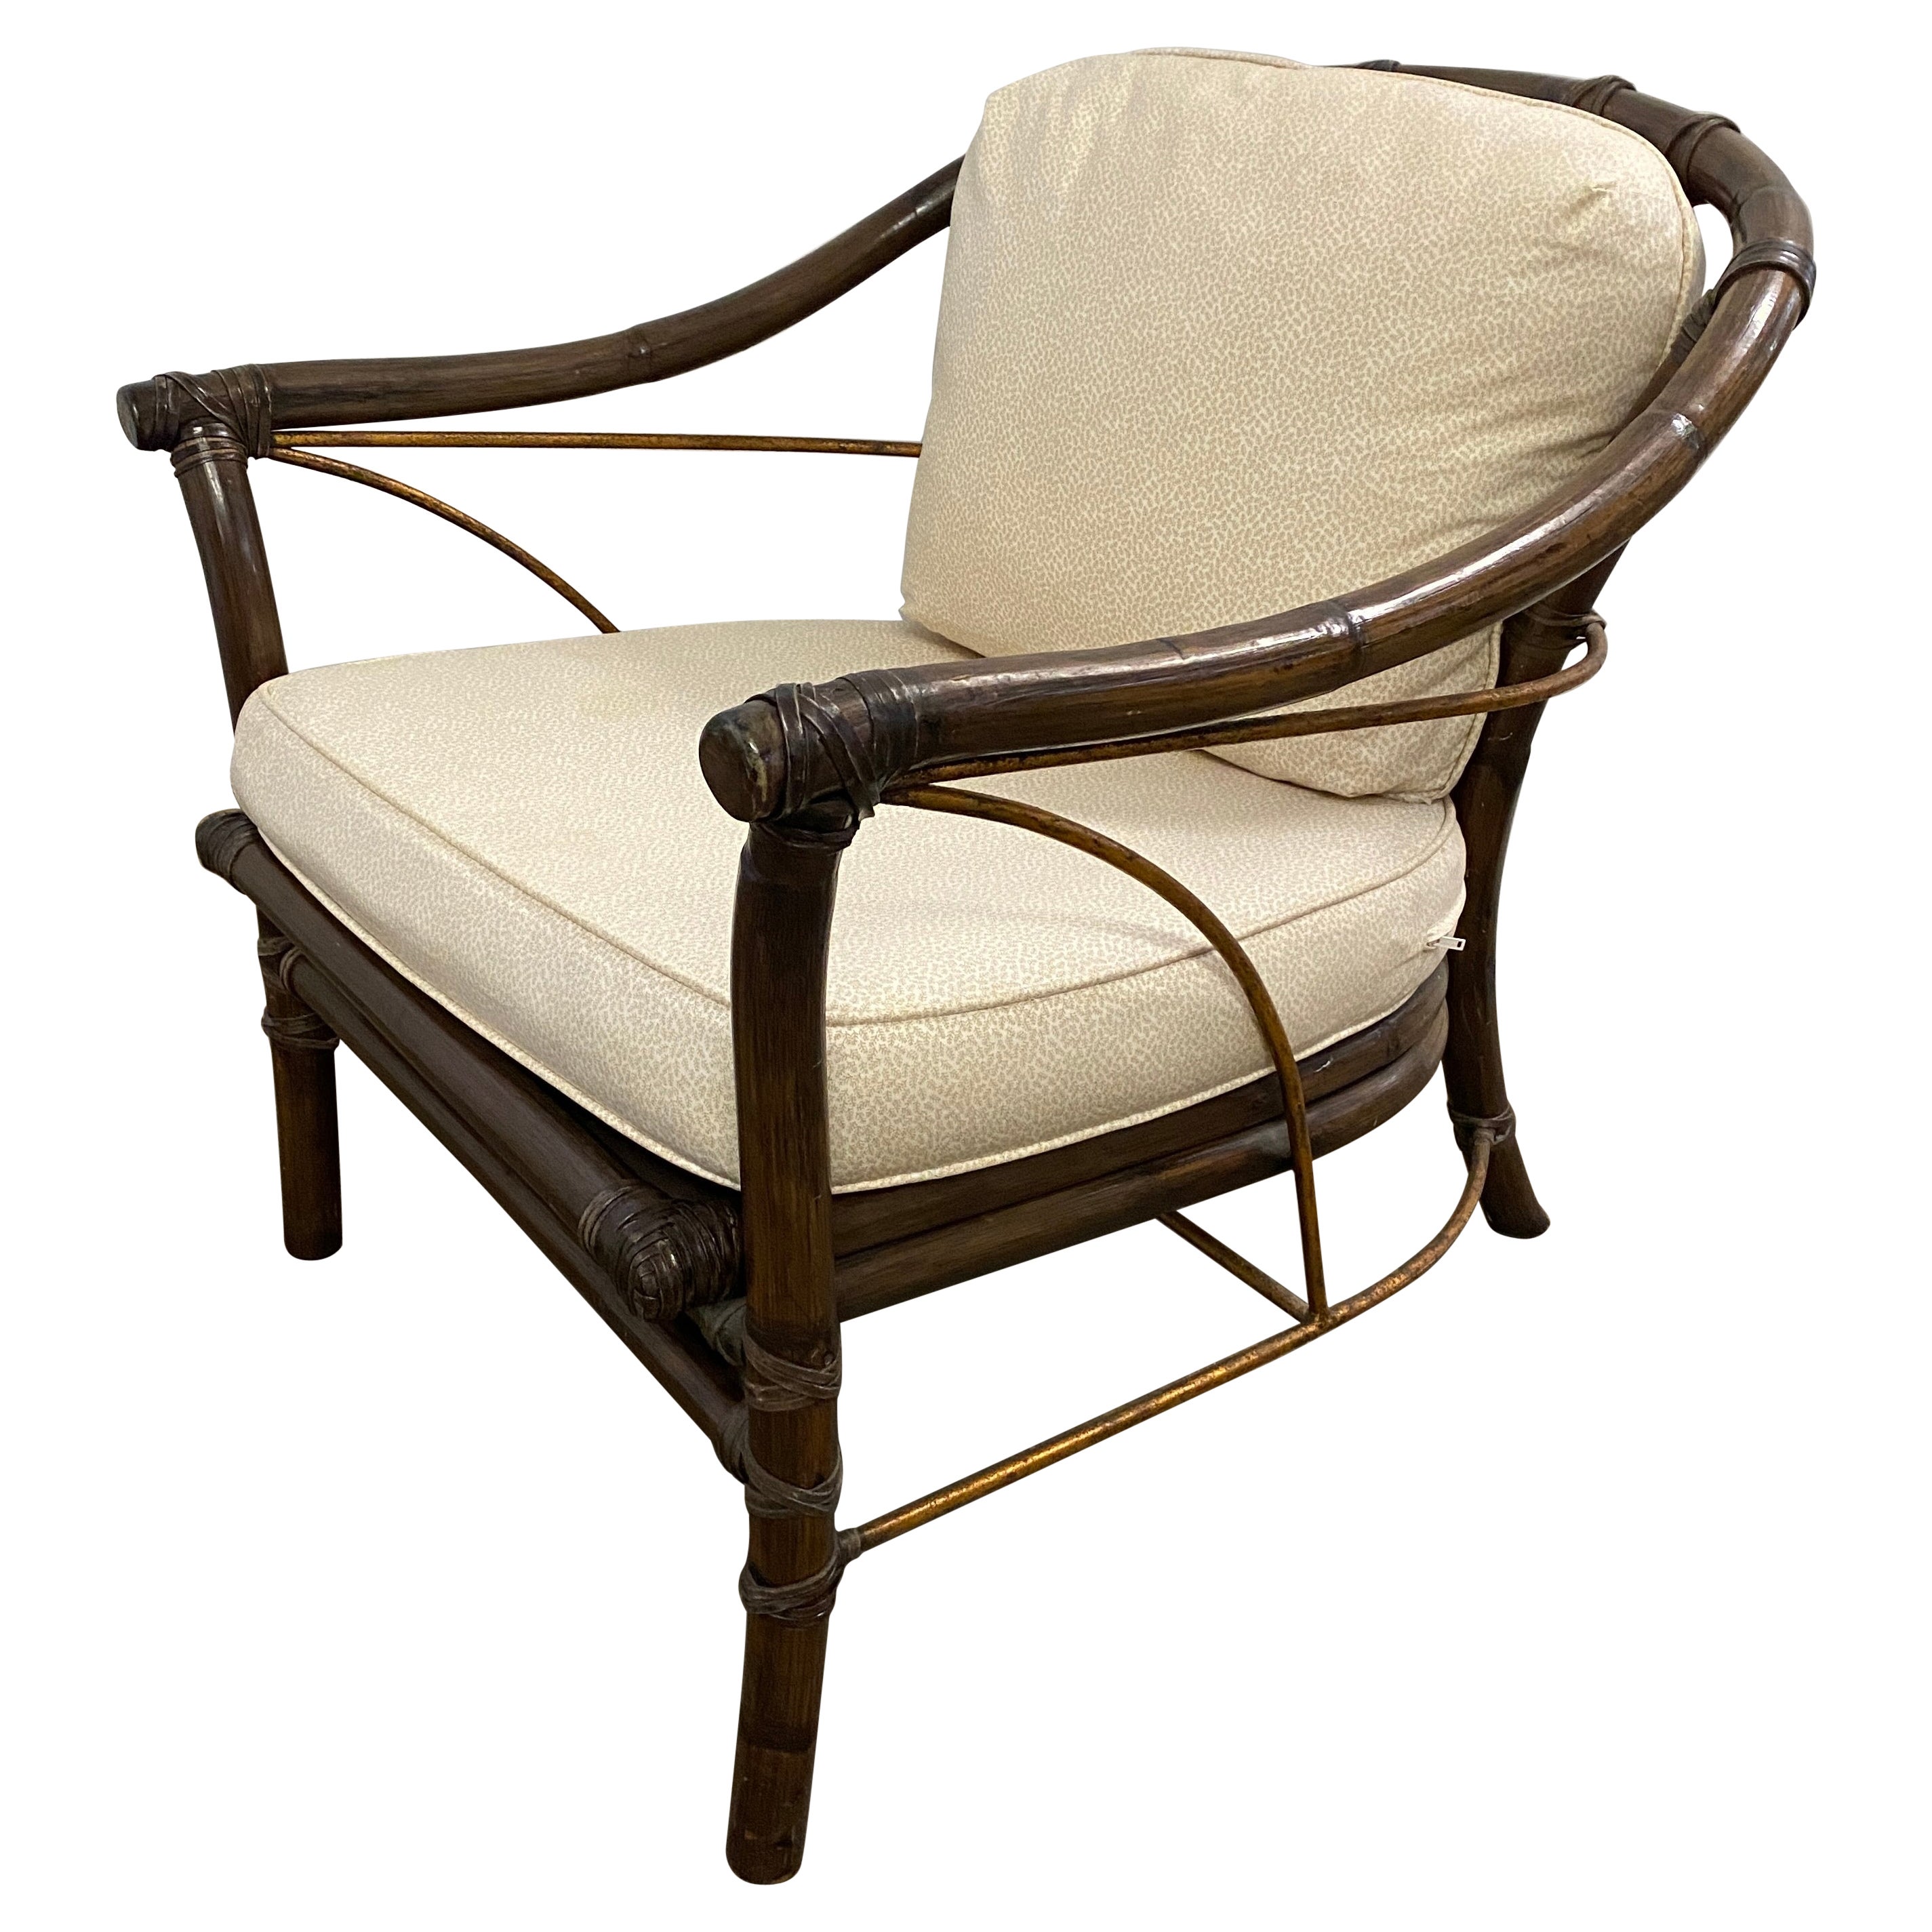 McGuire Hollywood Regency Style Bamboo Rattan Lounge Chair